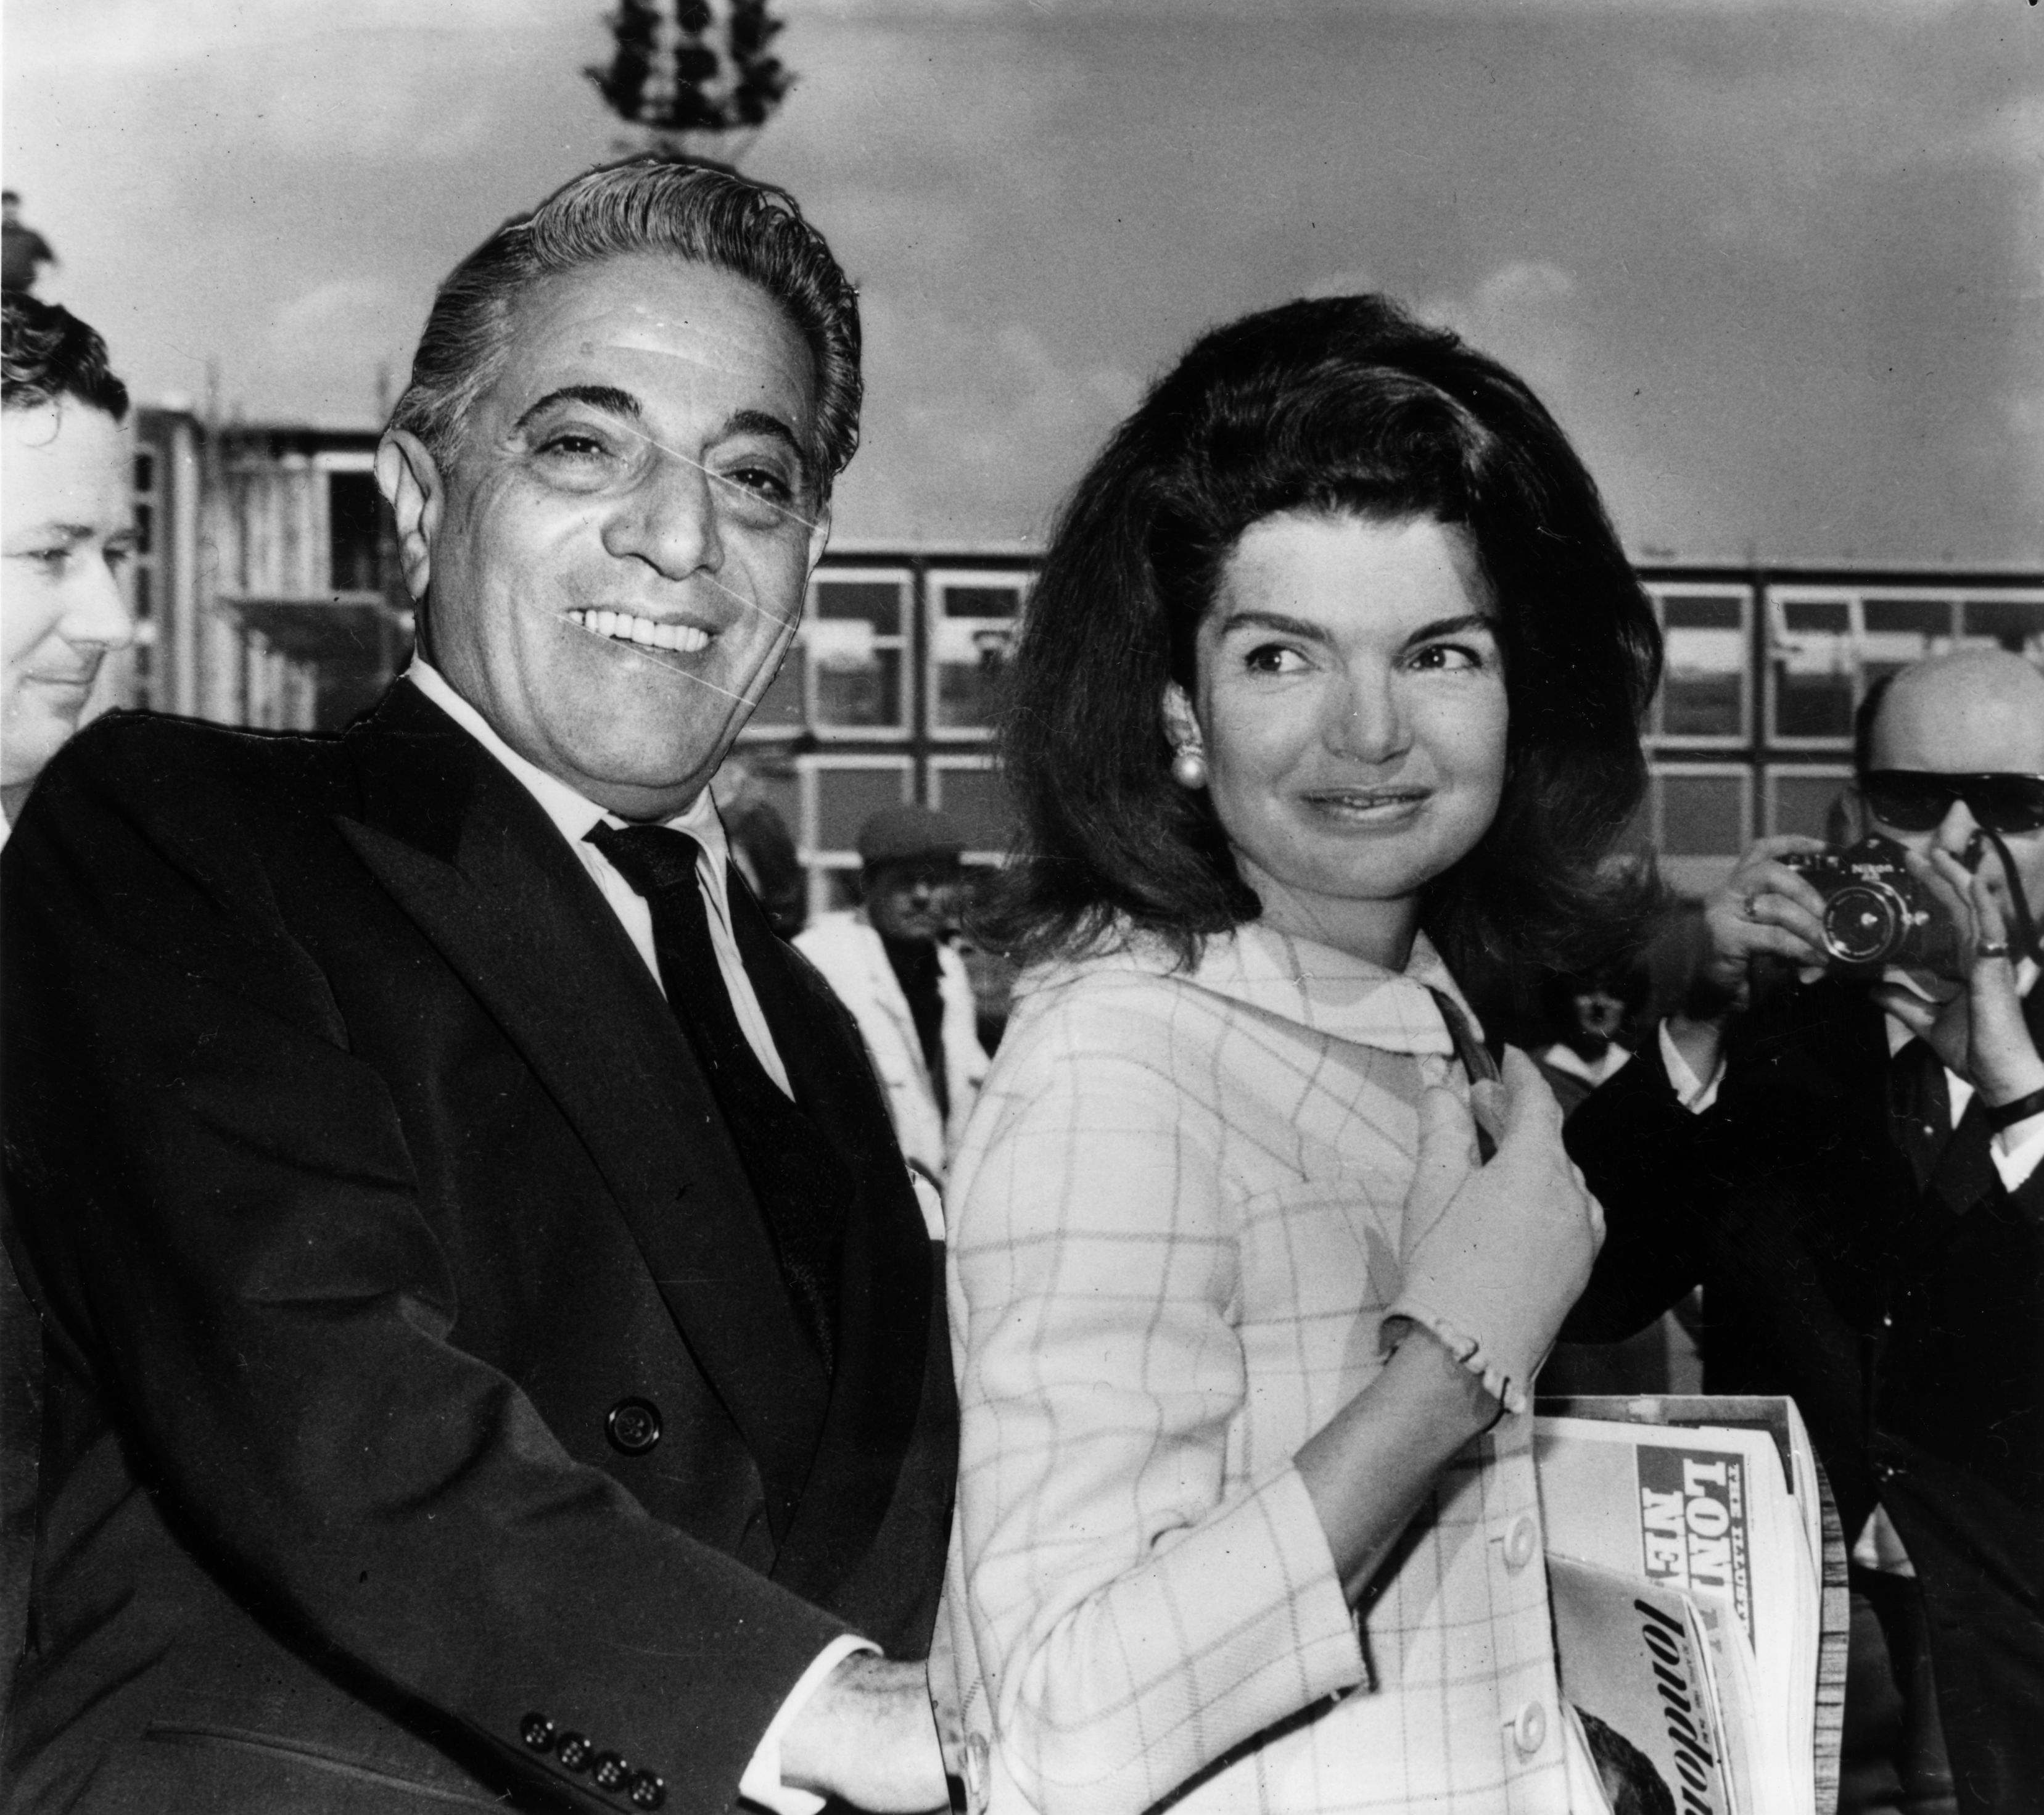 Aristotle Onassis and Jackie Kennedy take a photo together on October 18, 1968 | Photo: Getty Images